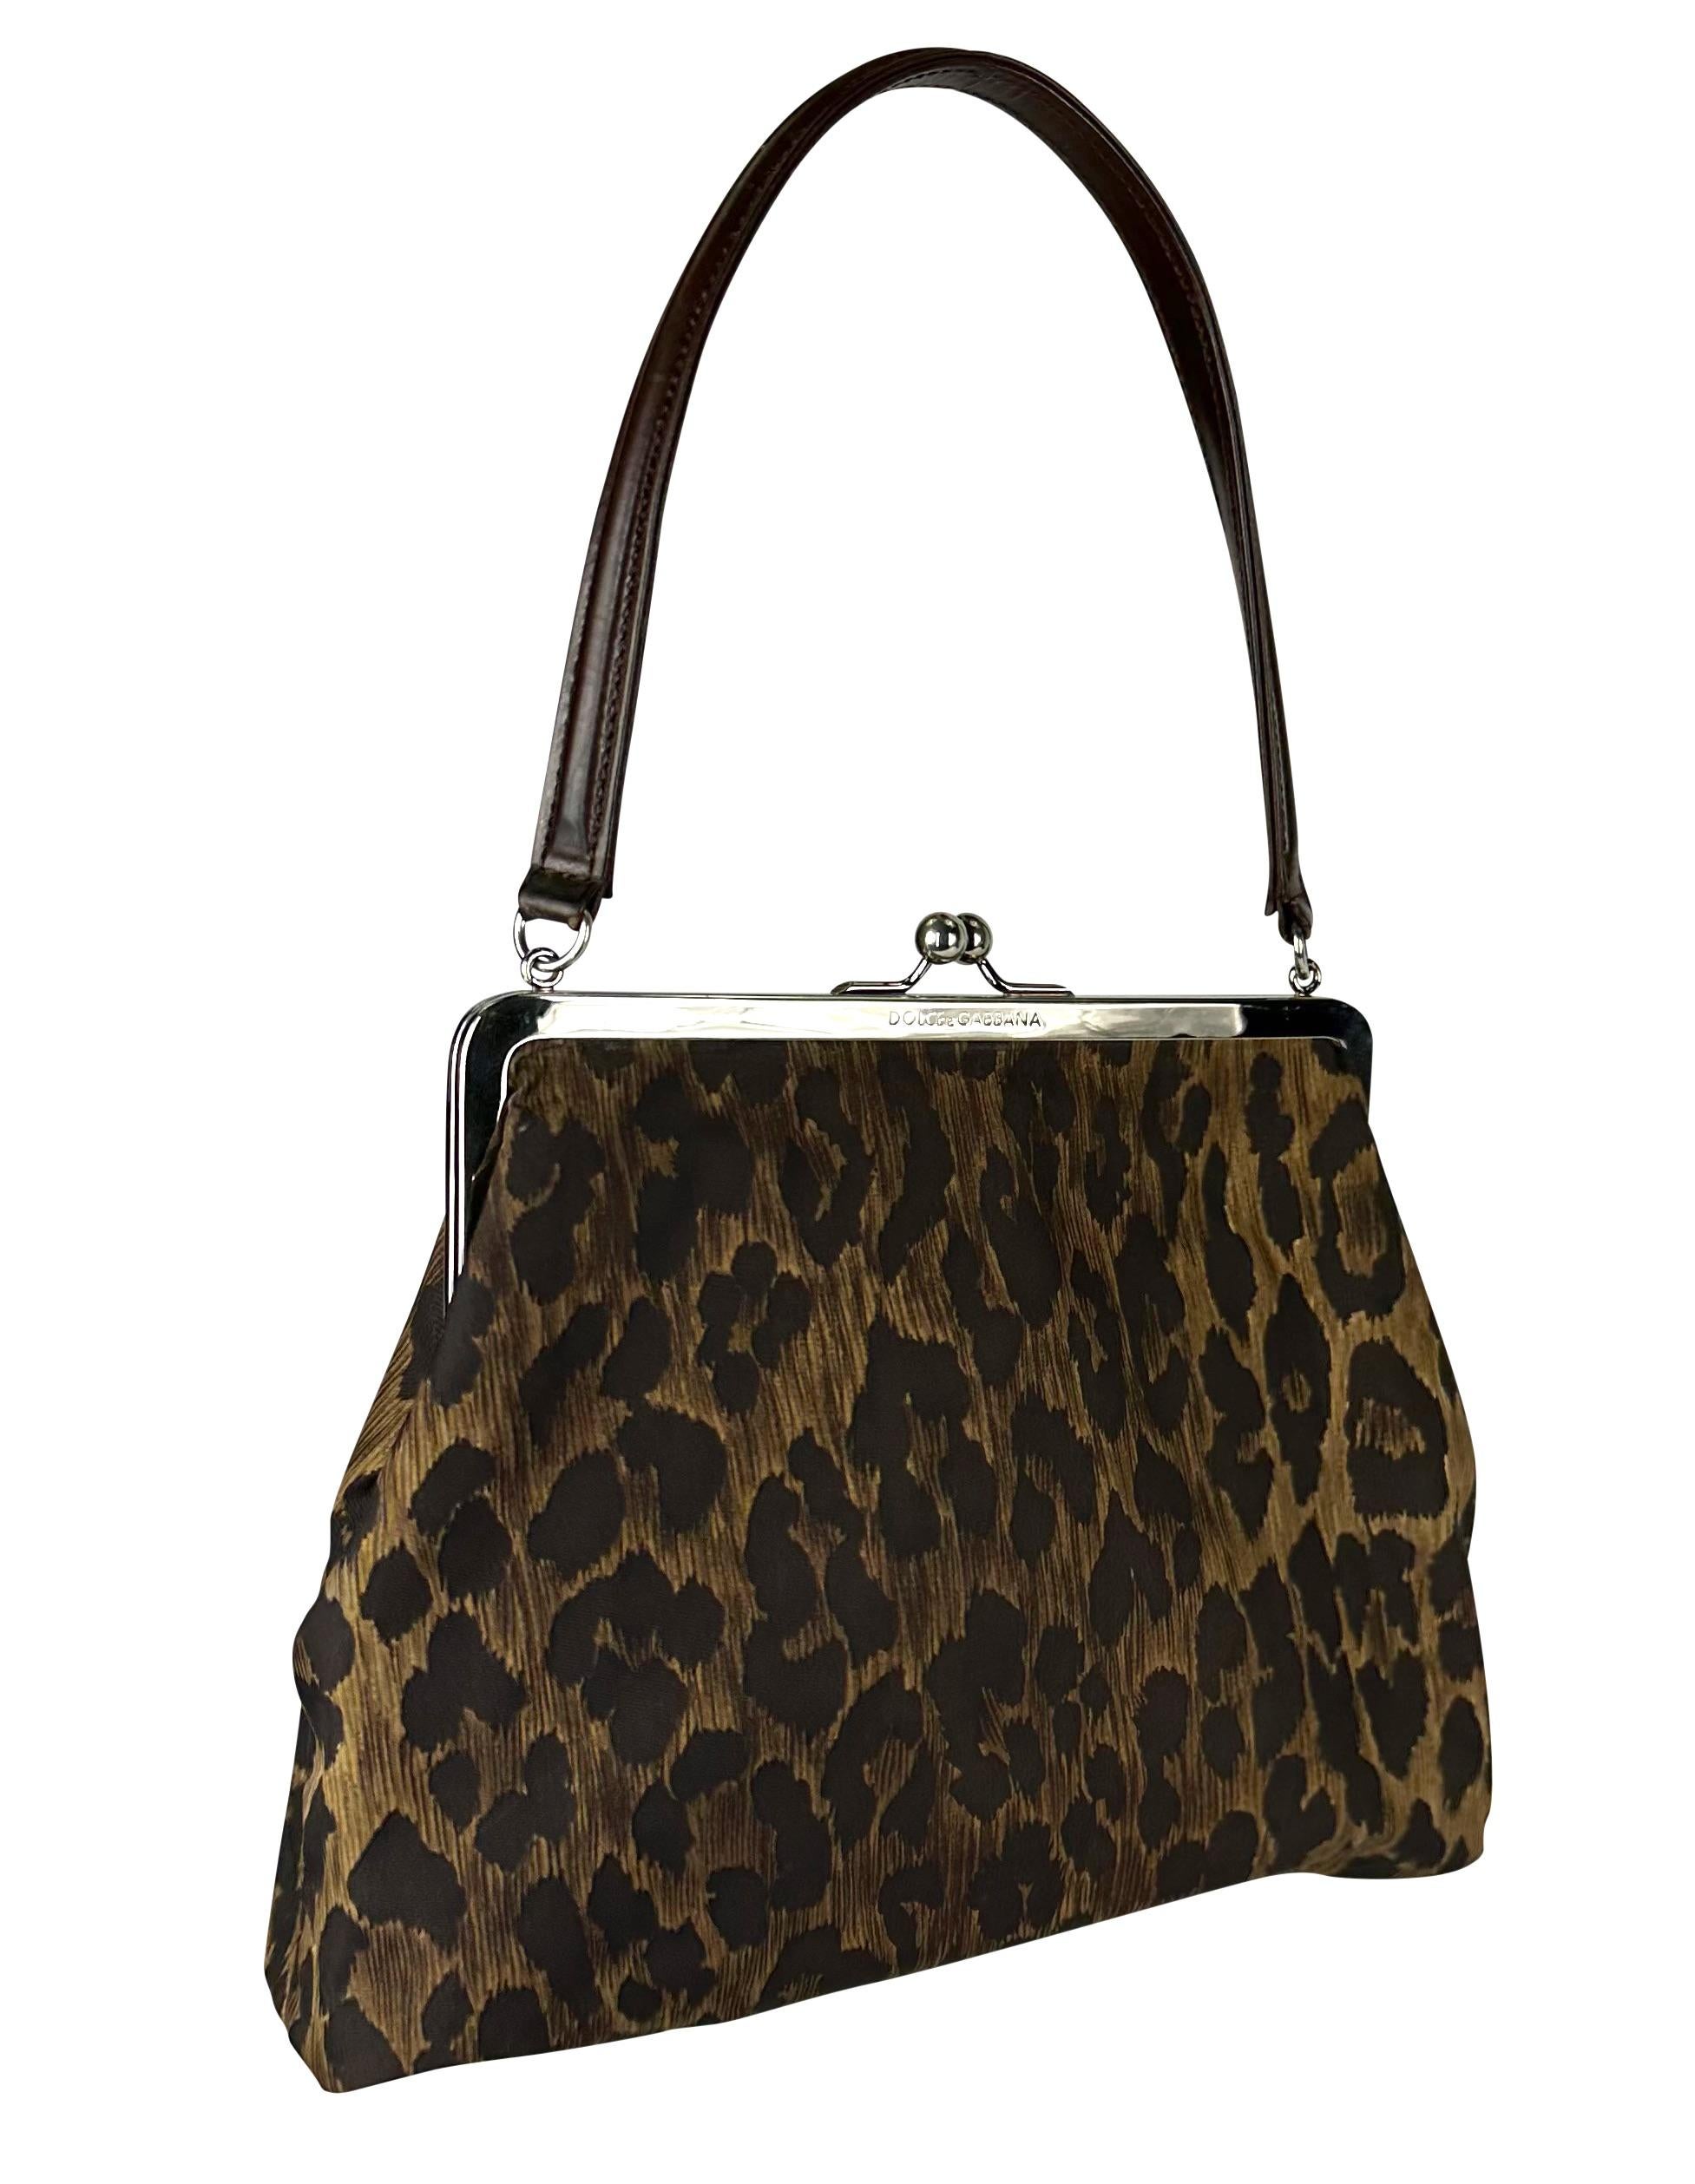 Late 1990s Dolce & Gabbana Brown Cheetah Print Kiss Lock Top Handle Bag In Good Condition For Sale In West Hollywood, CA